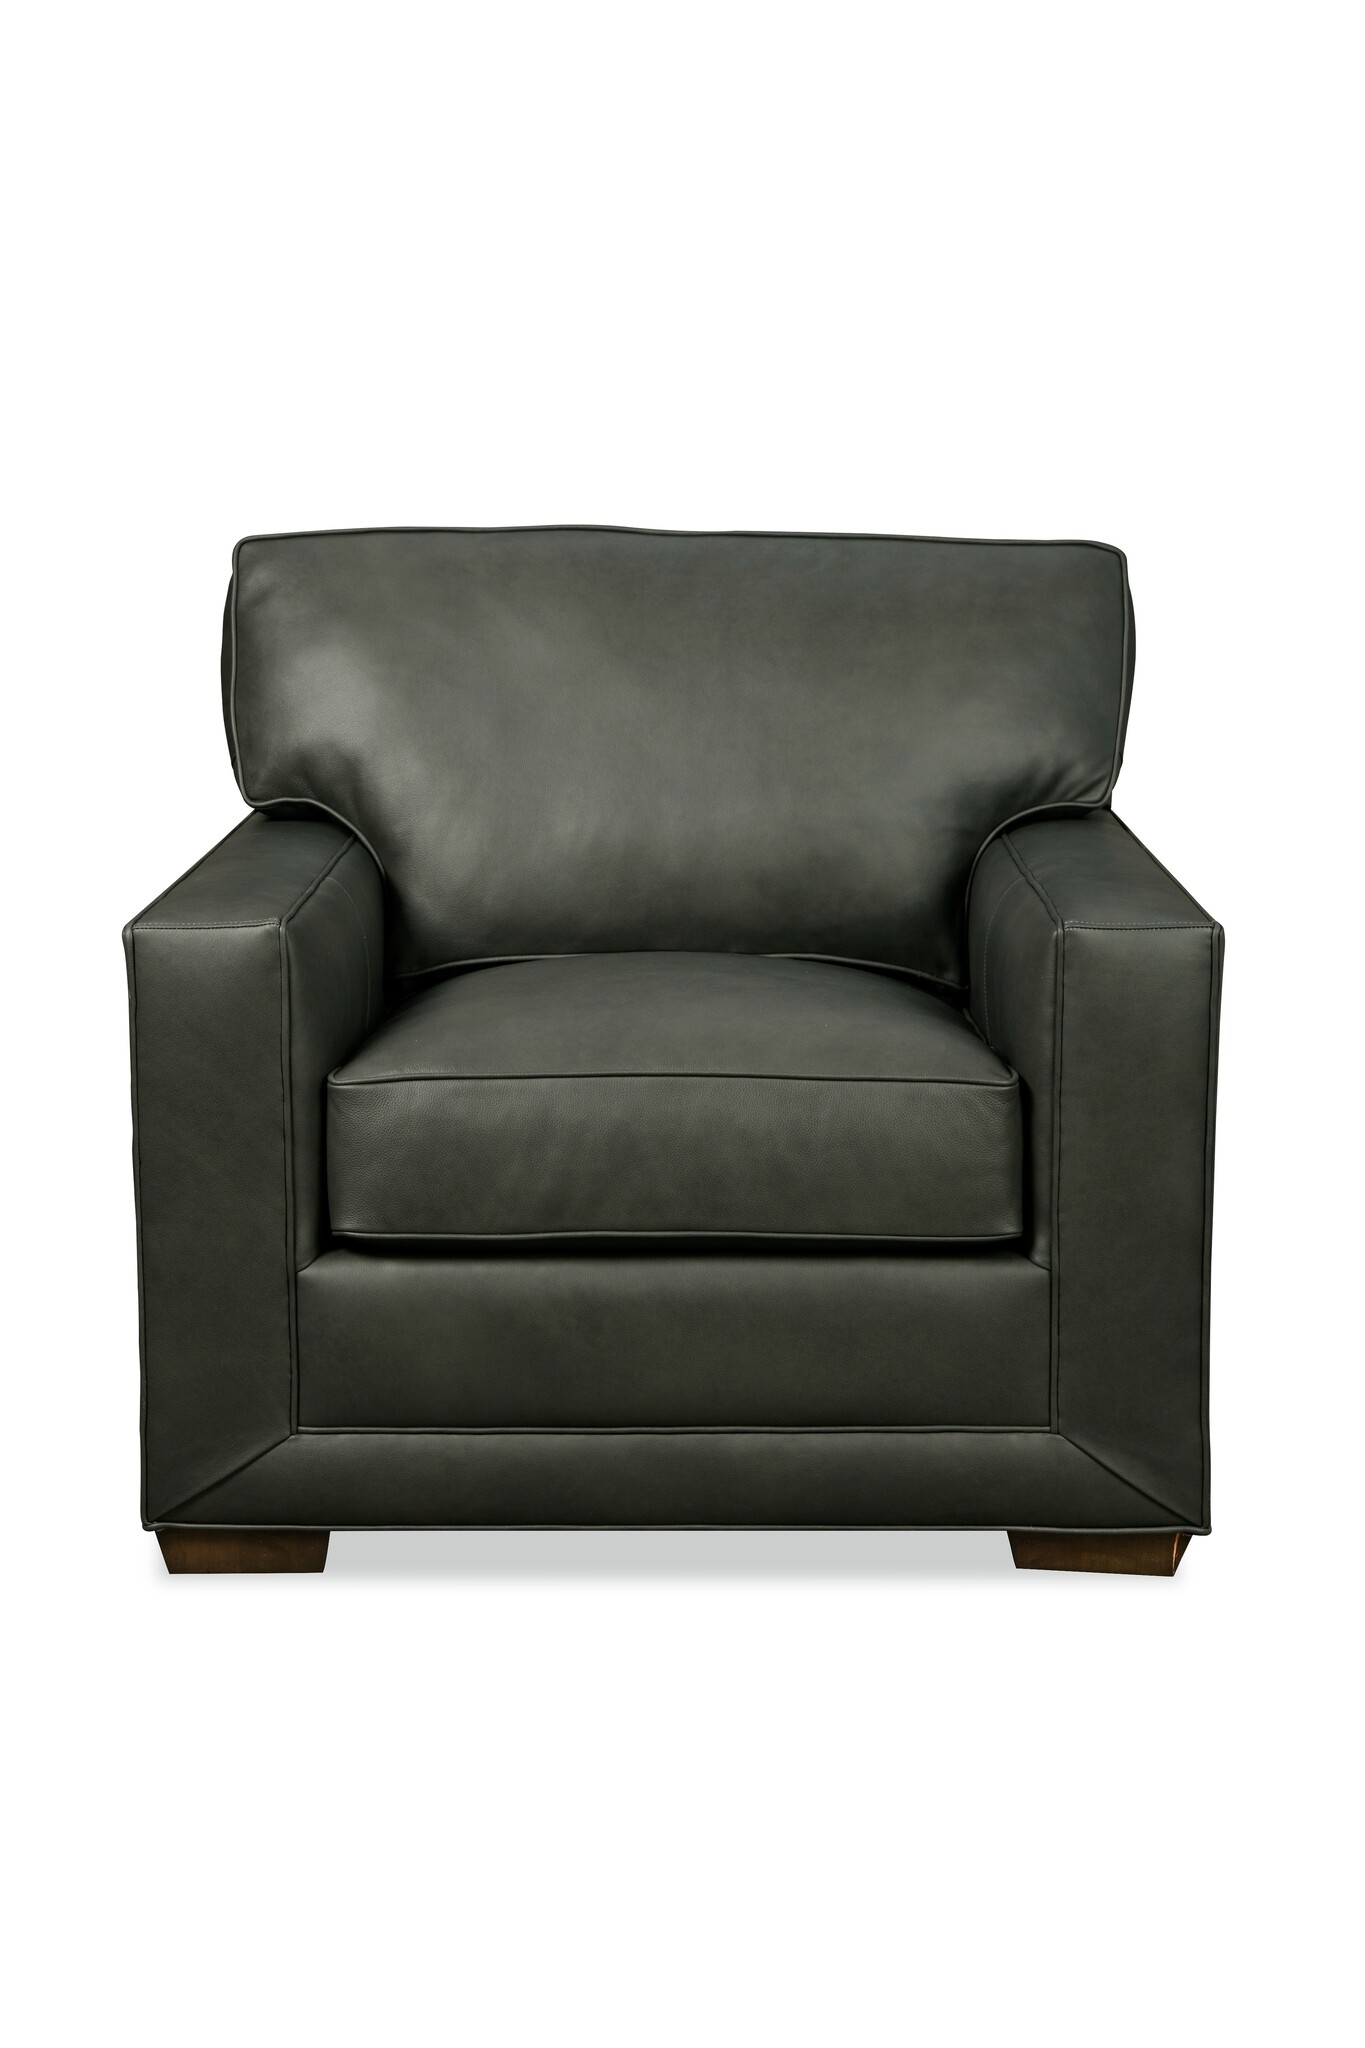 Craftmaster Furniture 7231 Leather Chair